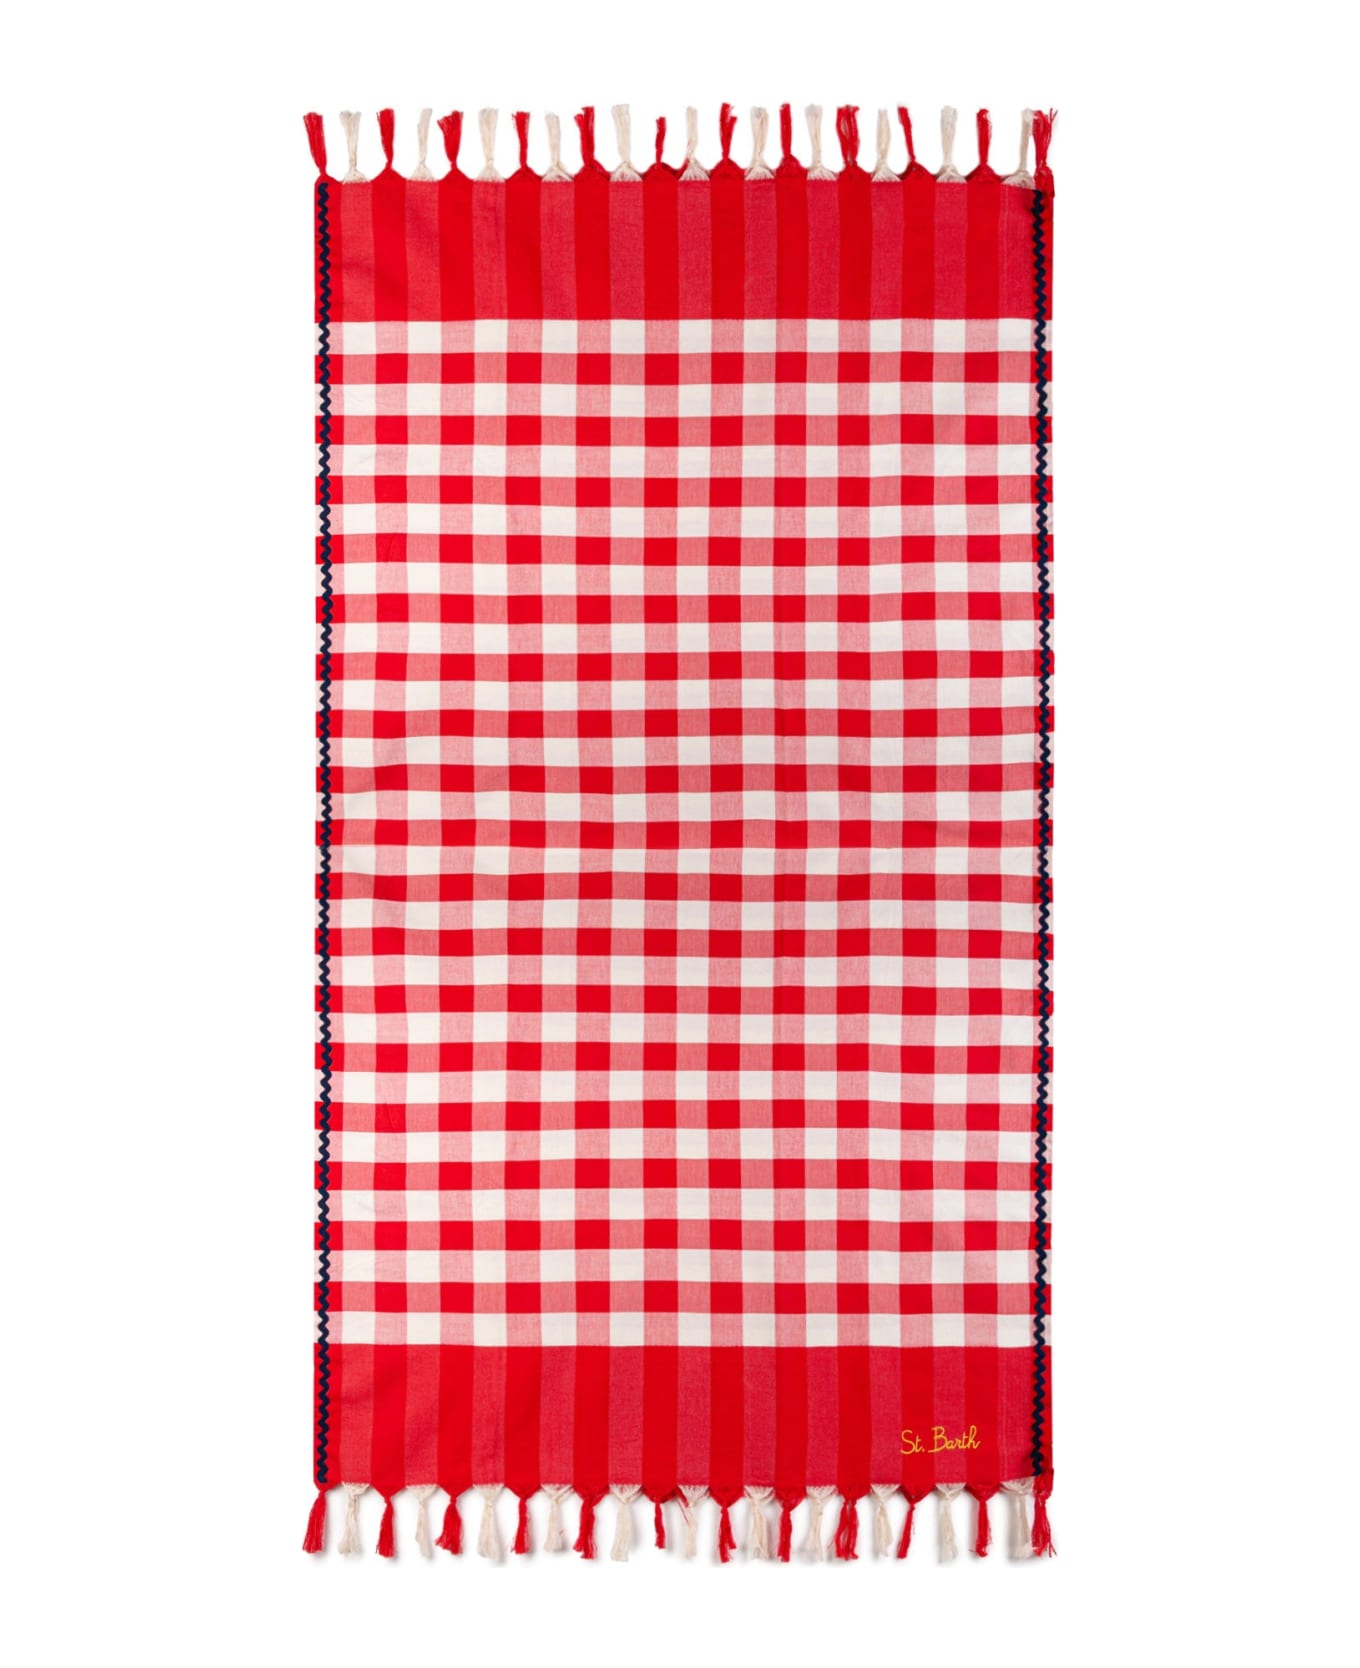 MC2 Saint Barth Fouta With Navy Blue Wave Trim And Gingham Print - RED